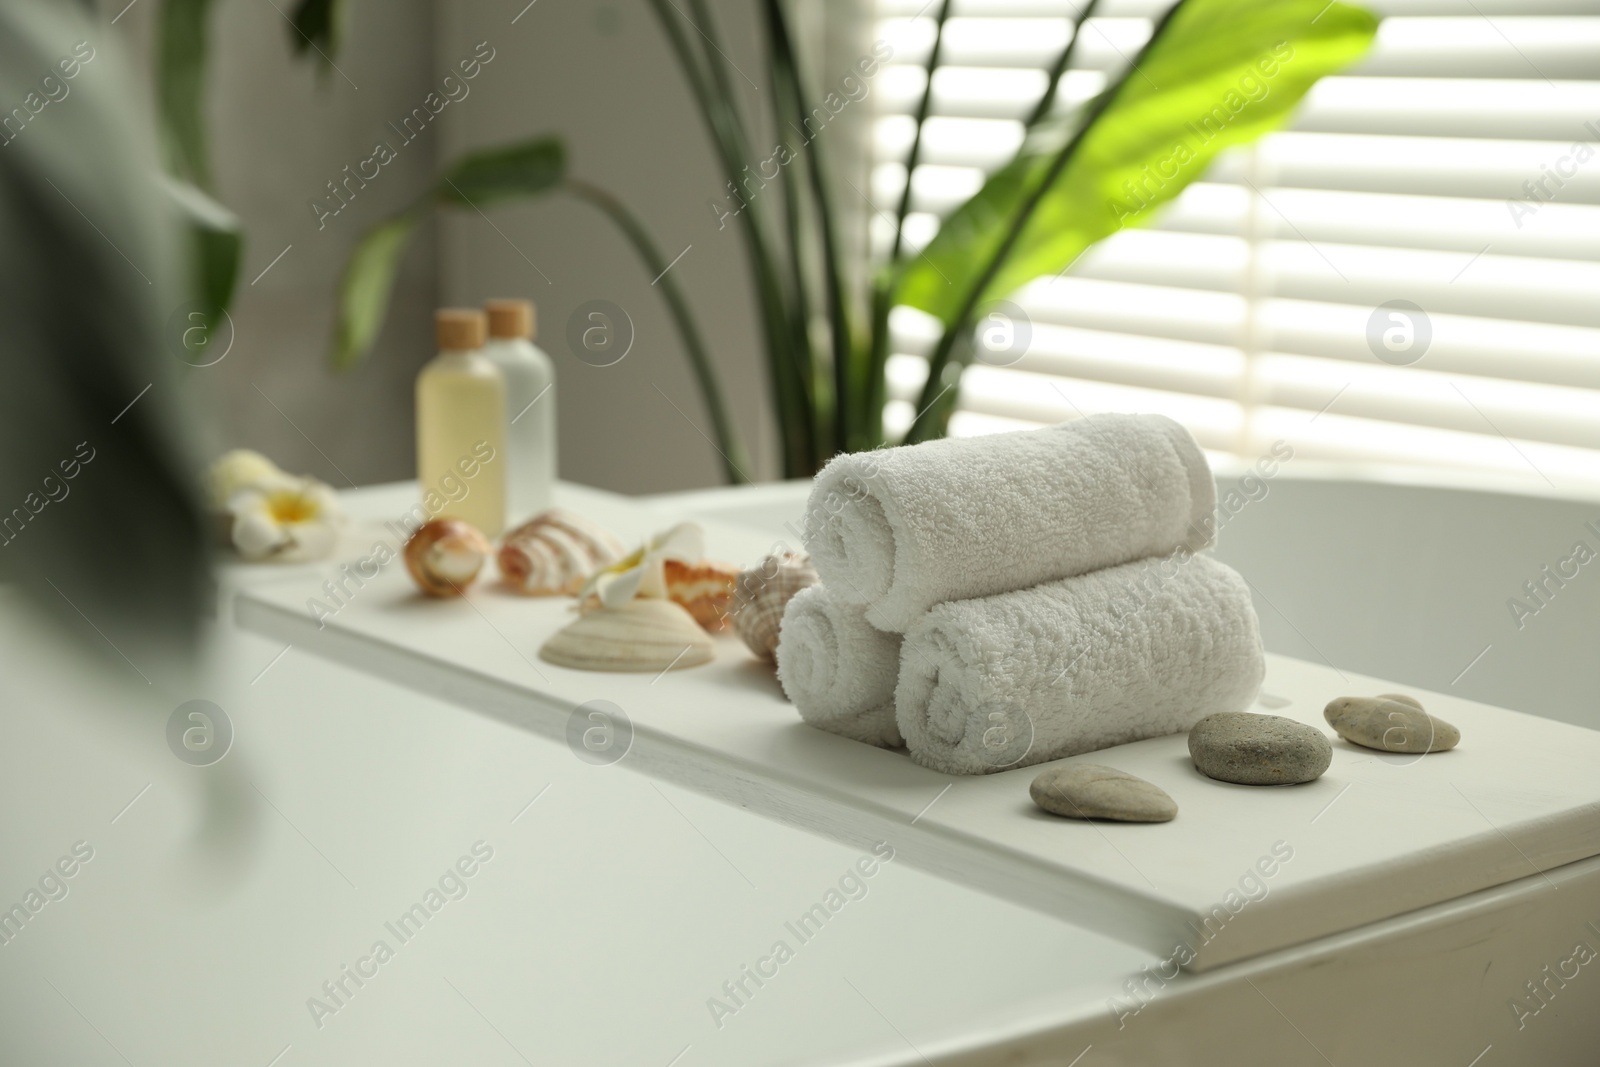 Photo of Bath tray with spa products and towels on tub in bathroom